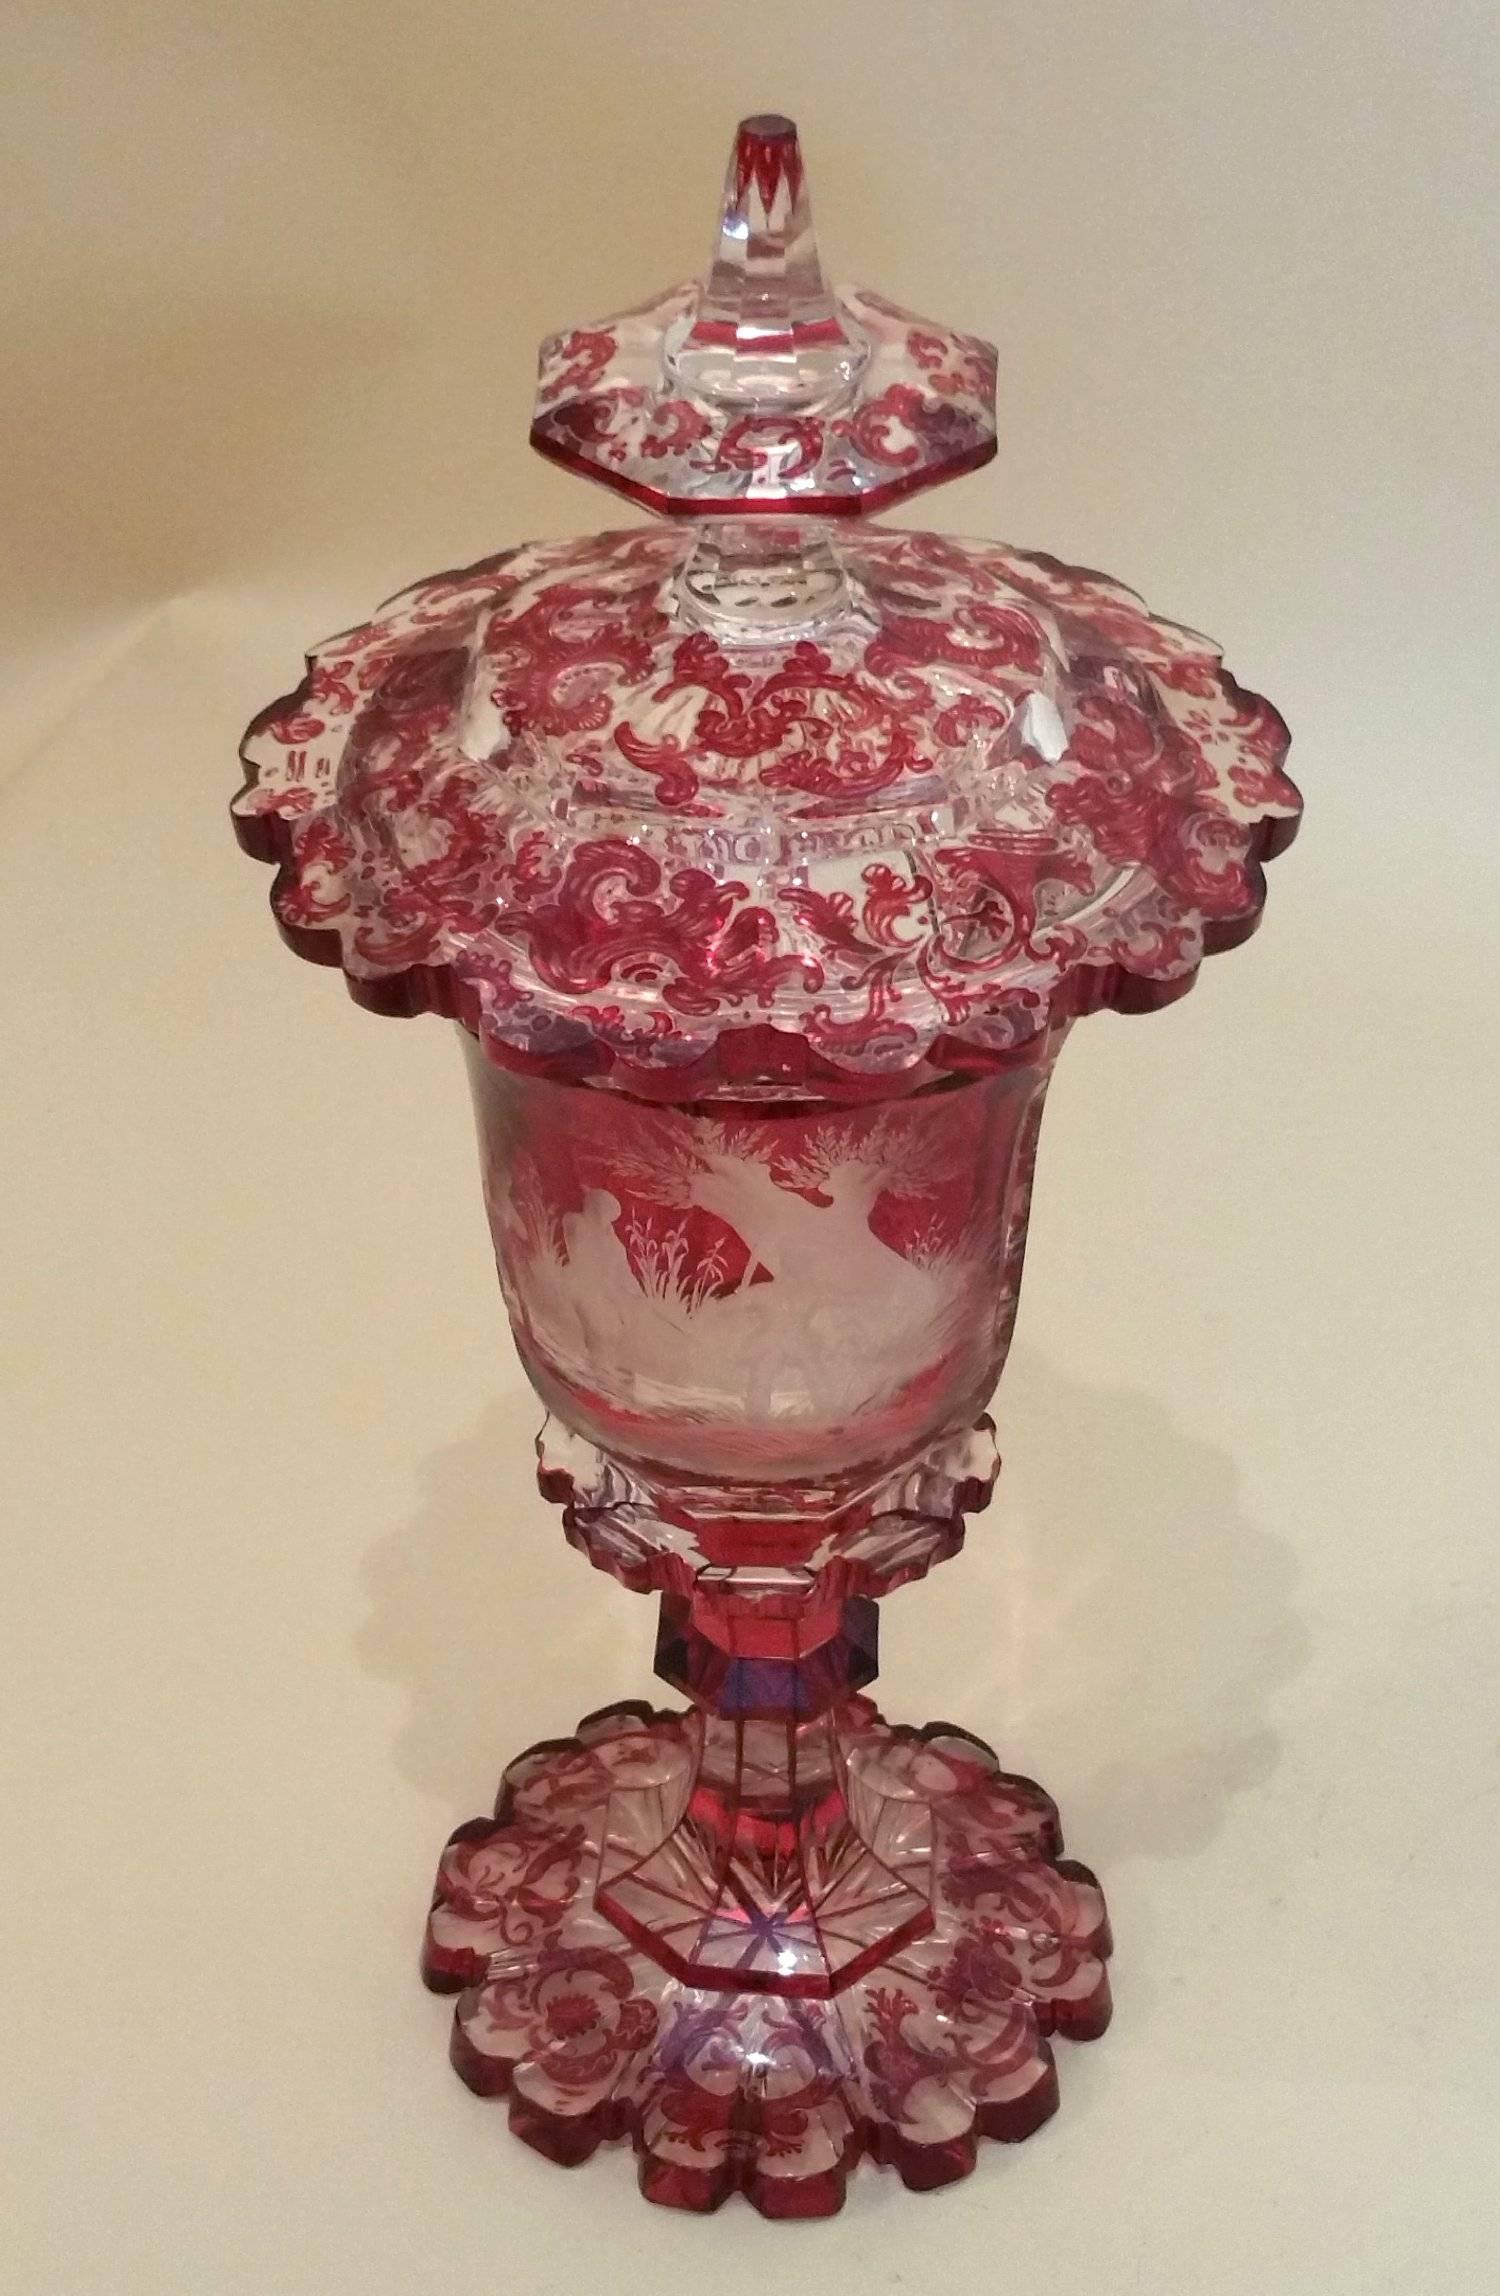 This superb 19th century Bohemian ruby overlaid glass vase and cover features a magnificent and intricate all-over design. The central area of the vase depicts an engraved hunting scene, with a clear oval ‘window’ on the opposite side so the